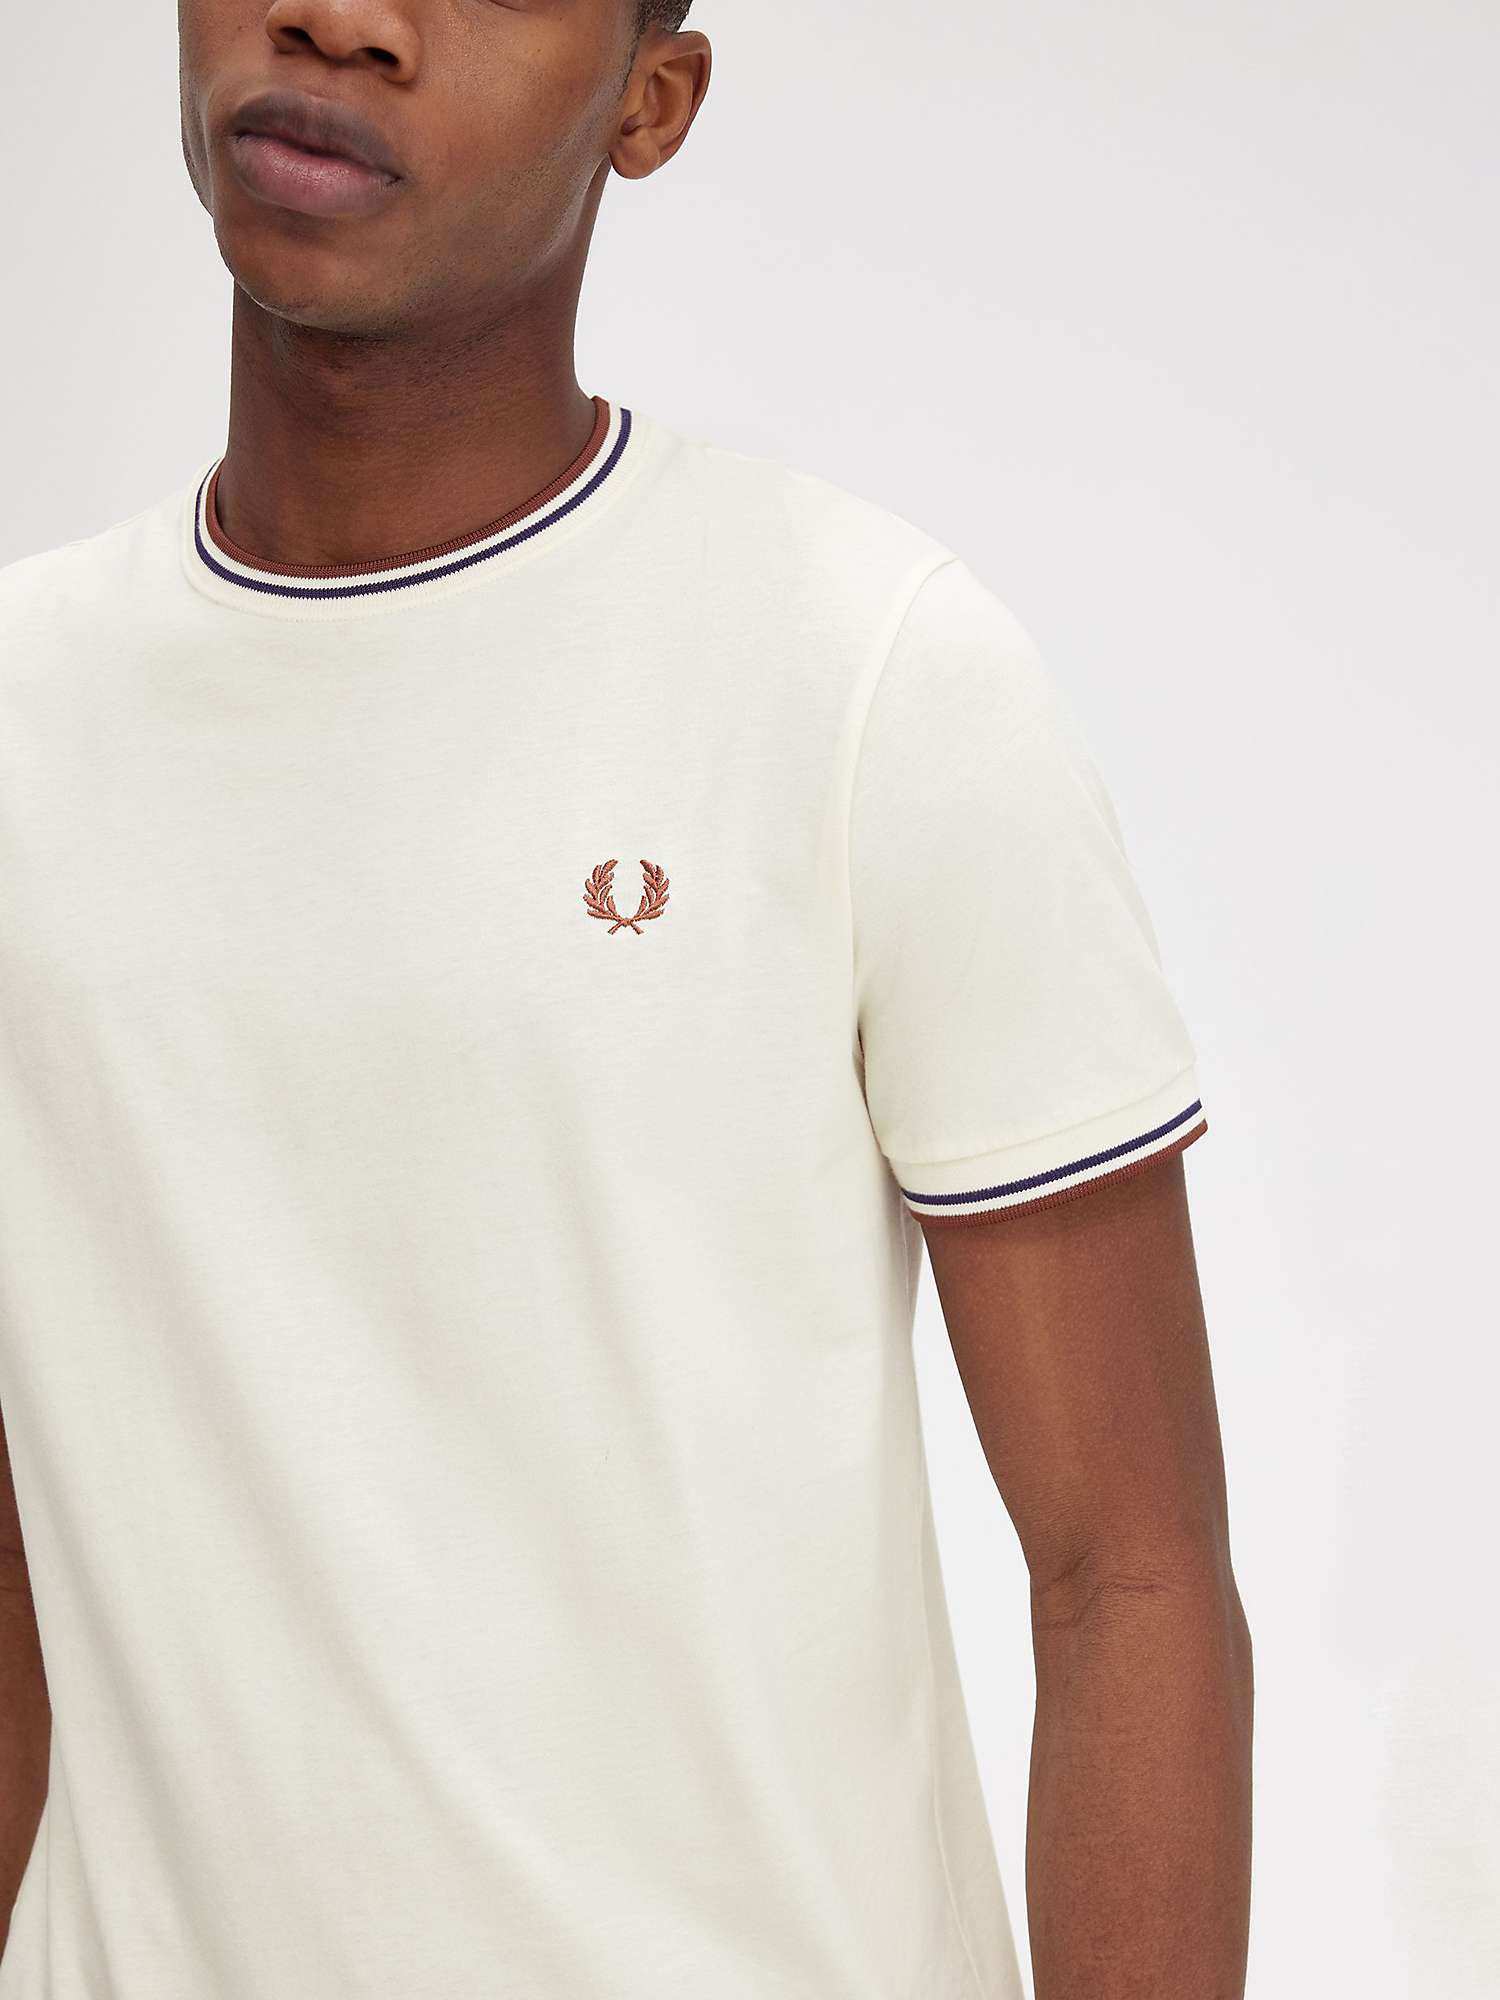 Fred Perry Twin Tipped T-Shirt, Ecru at John Lewis & Partners